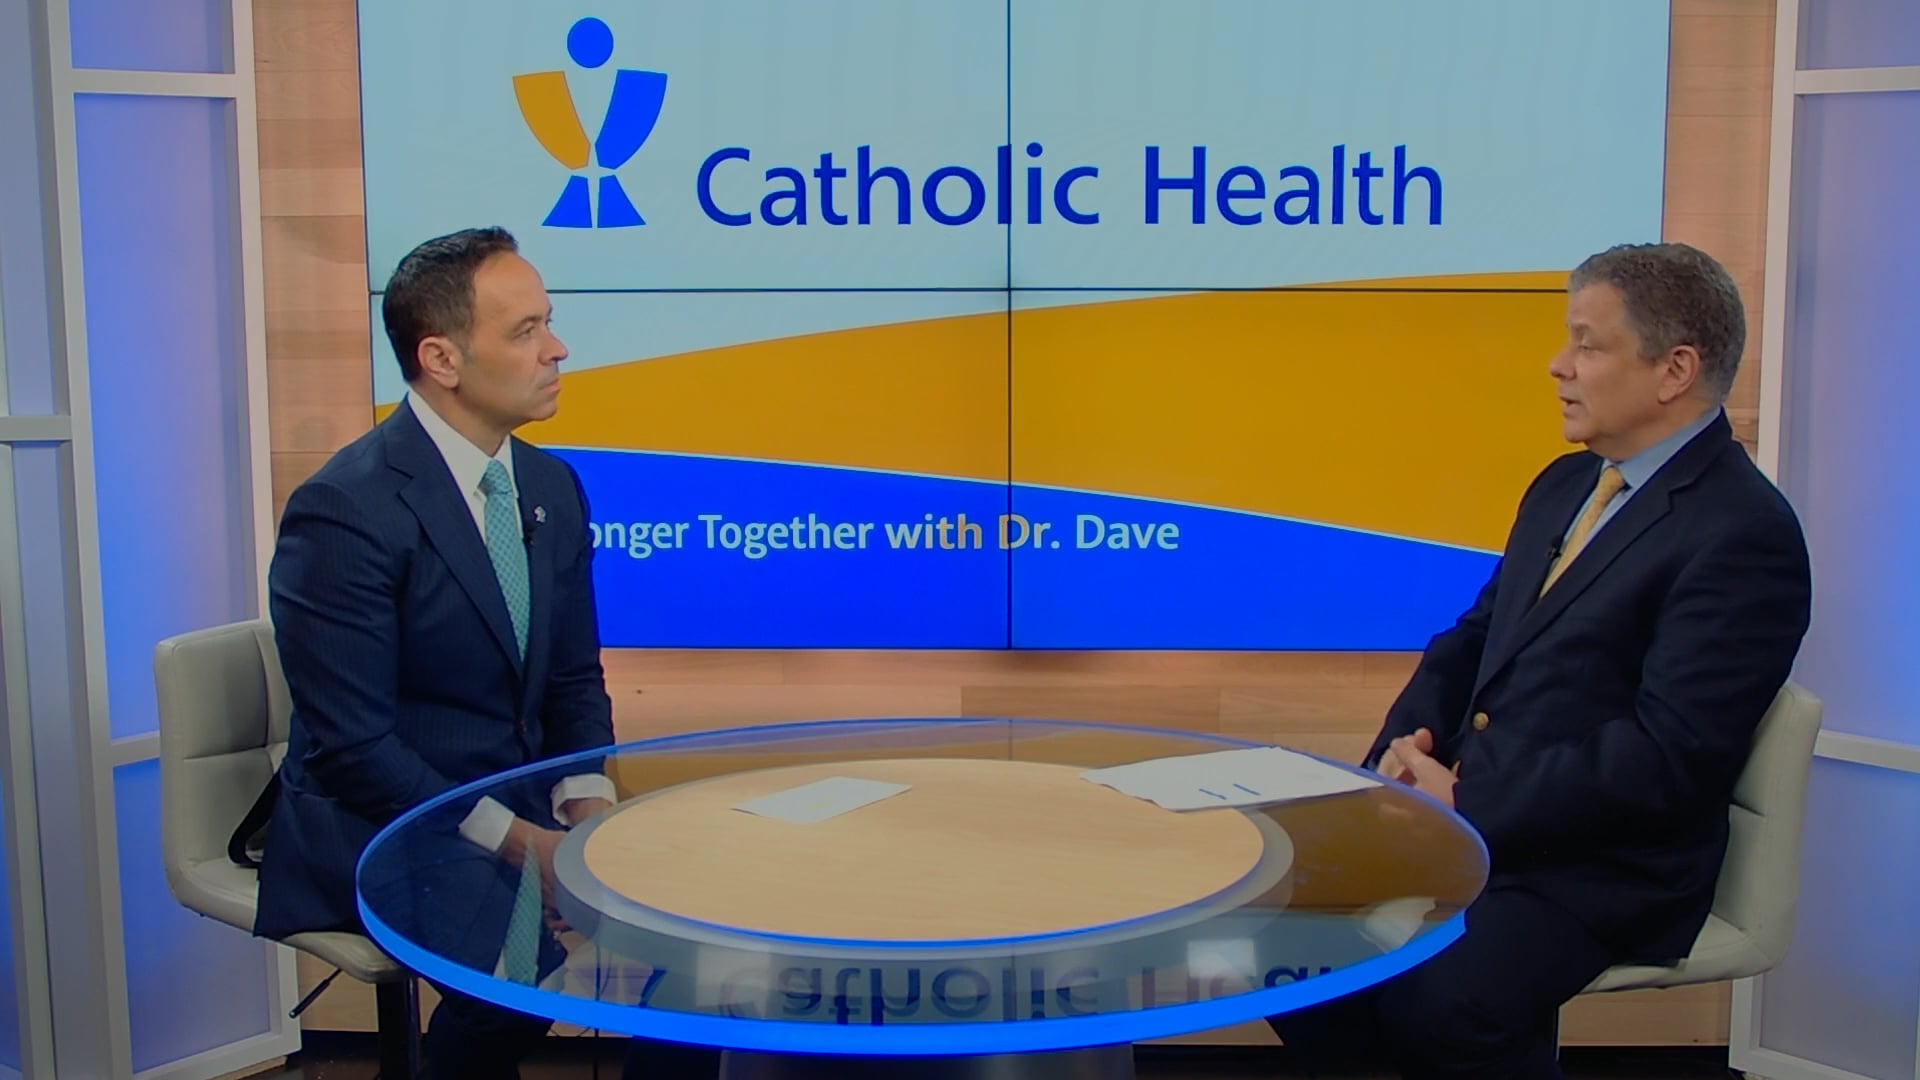 Catholic Health: Stronger Together with Dr. Dave - Easy Access to the Care You Need